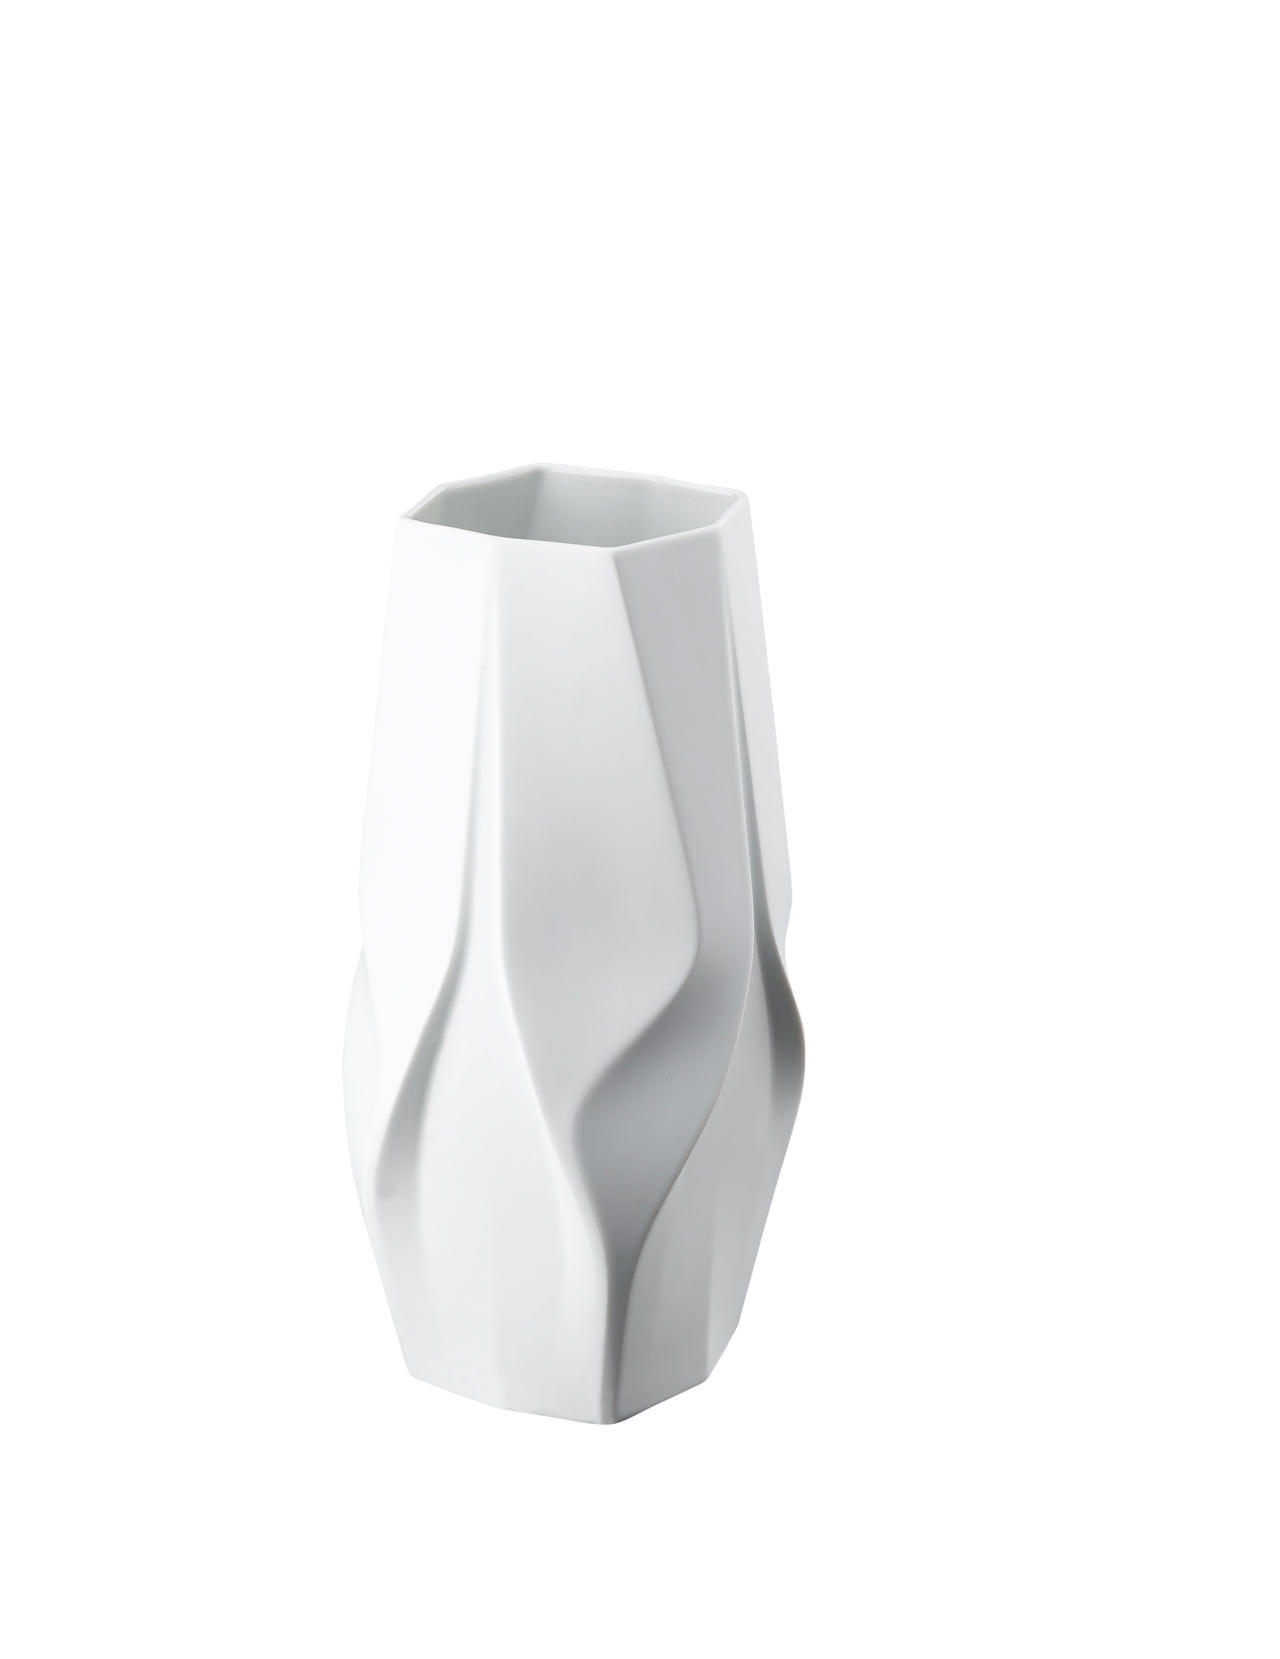 Zaha Hadid Design Releases New Porcelain Collections for Rosenthal ...